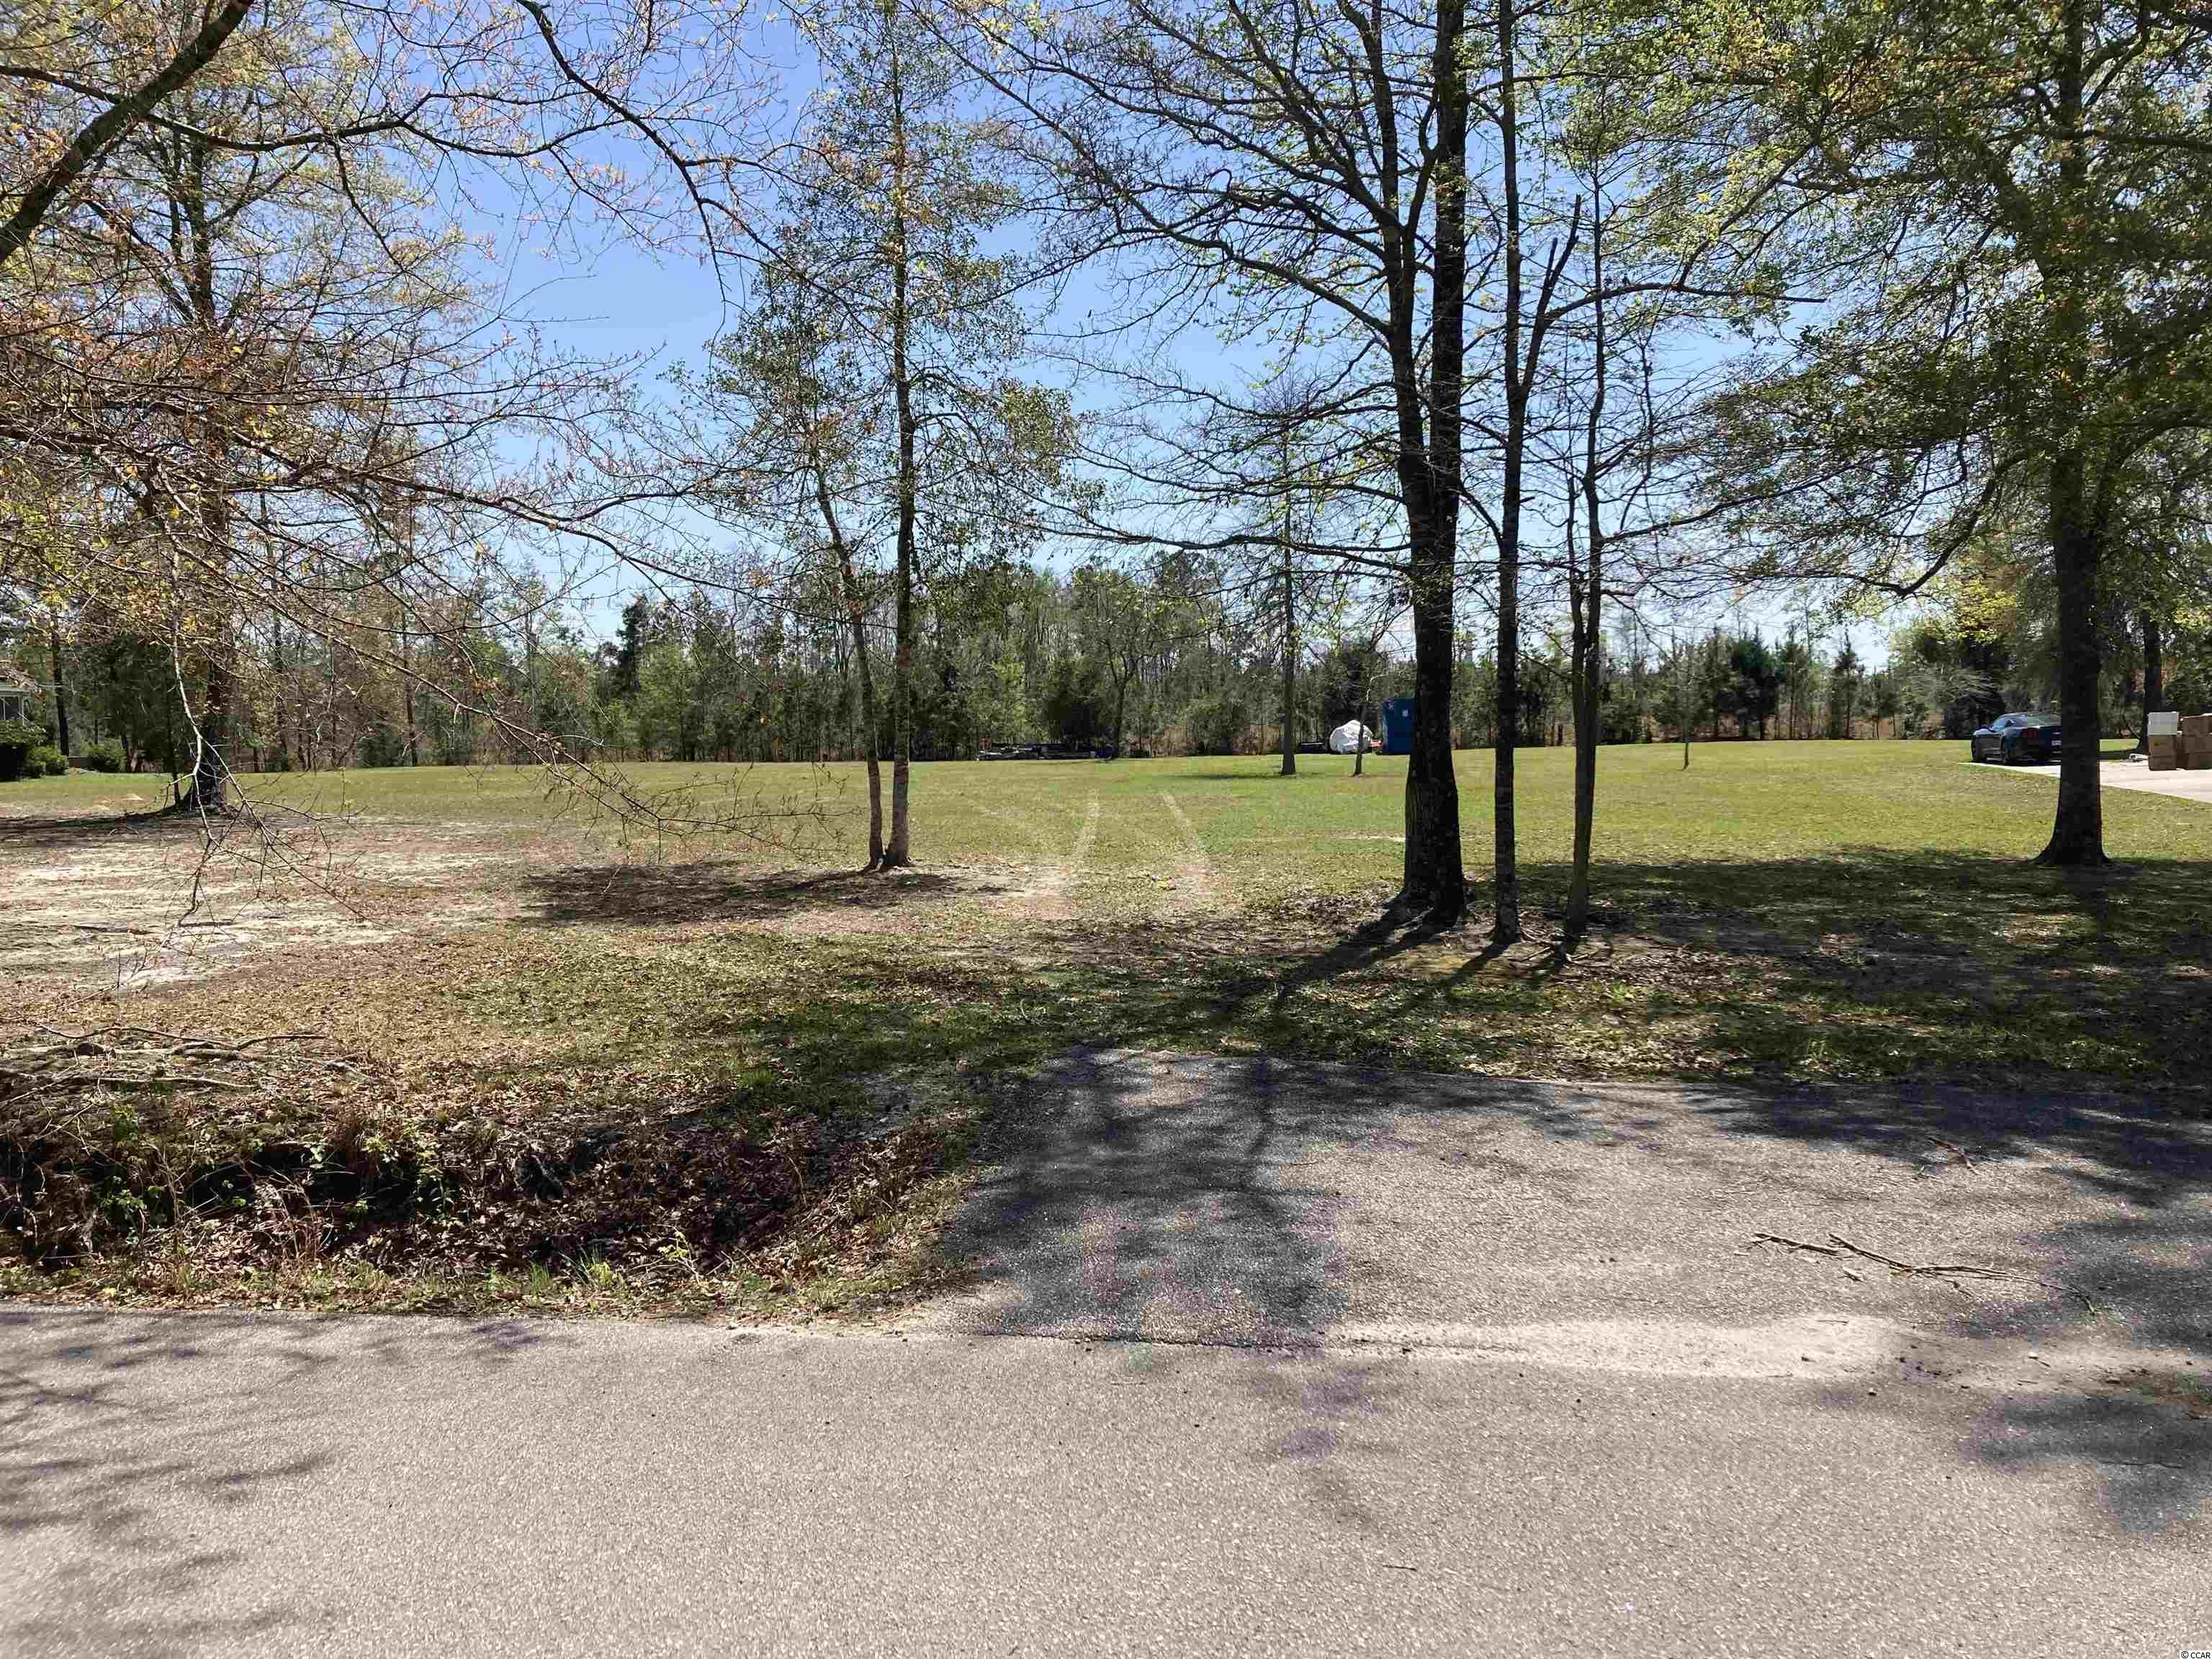 beautiful 1 acre private lot just waiting for you to build your dream home with deeded water access of penny royal creek.  call listing agent with any questions. there isn't a hoa, but new homeowner will have 25% equity in the deeded water access and if any repairs are needed to the boat ramp/landing, they will be responsible for 25%.